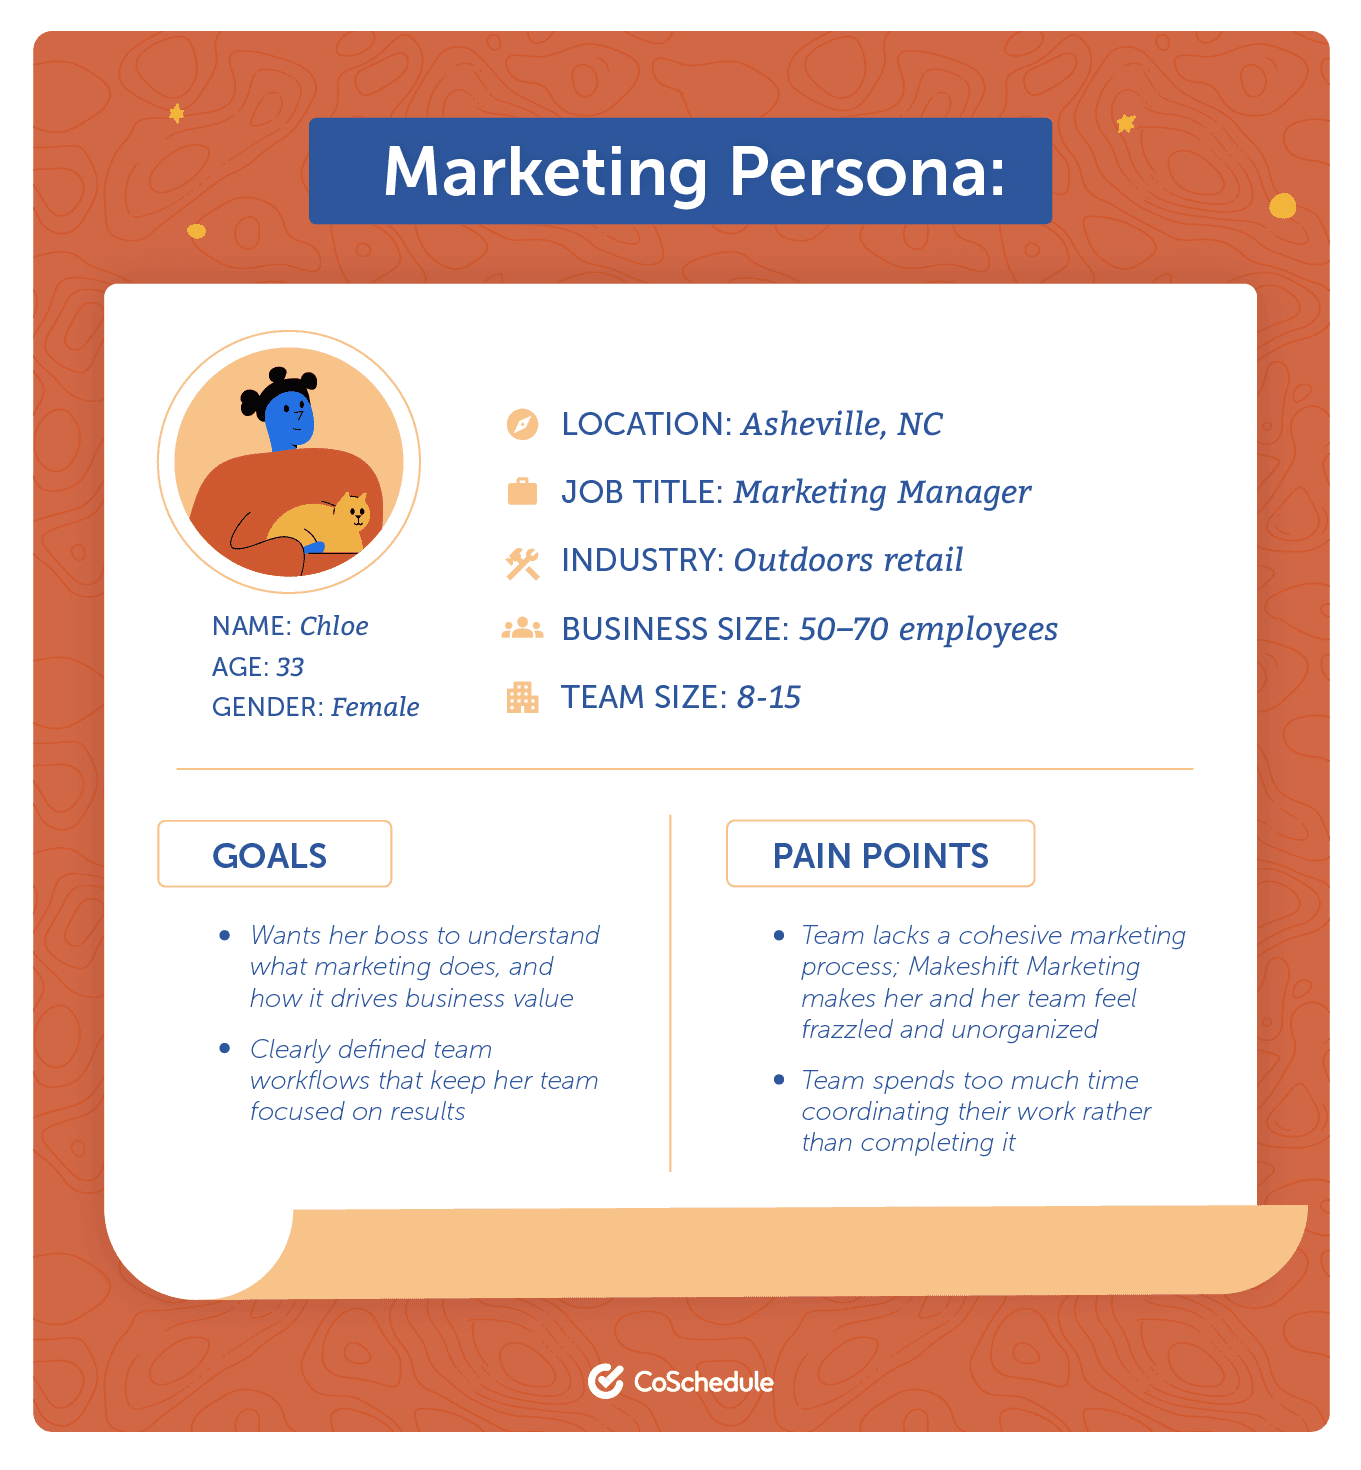 Marketing Persona: How To Understand Your Target Audience